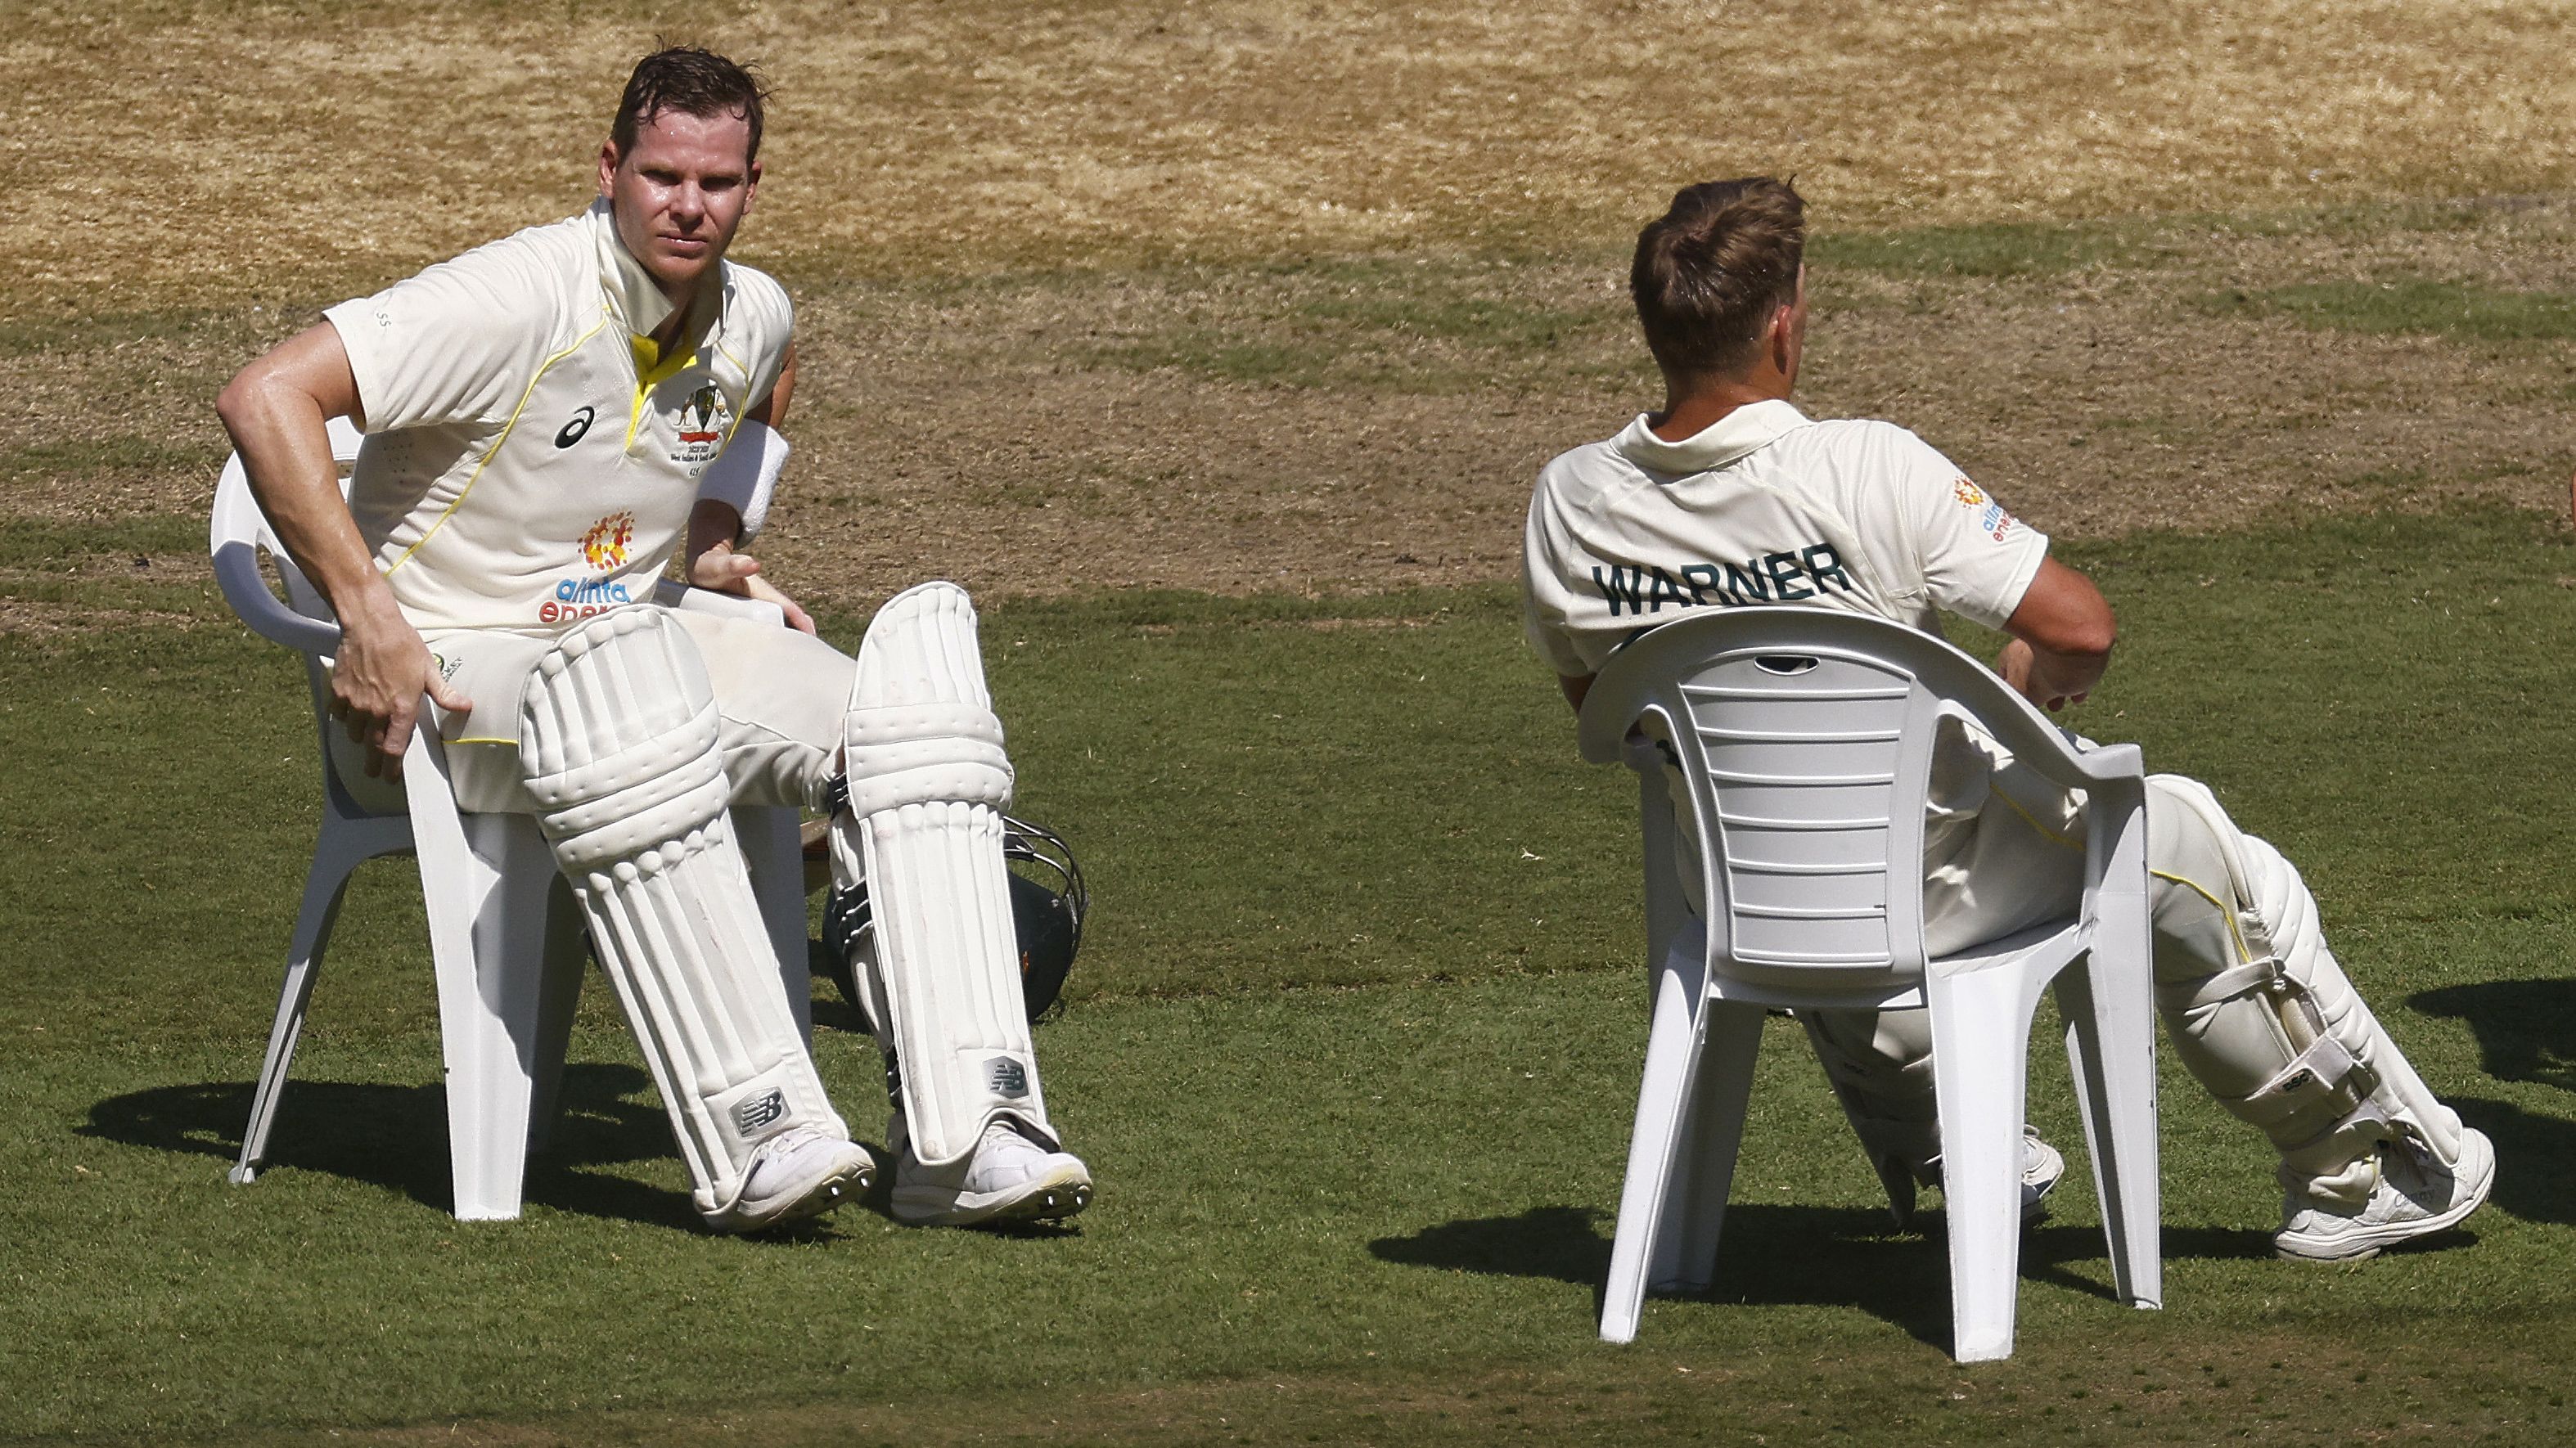 MELBOURNE, AUSTRALIA - DECEMBER 27: Steve Smith of Australia (L) and David Warner of Australia take a seat on the afternoon drinks break during day two of the Second Test match in the series between Australia and South Africa at Melbourne Cricket Ground on December 27, 2022 in Melbourne, Australia. (Photo by Daniel Pockett - CA/Cricket Australia via Getty Images)